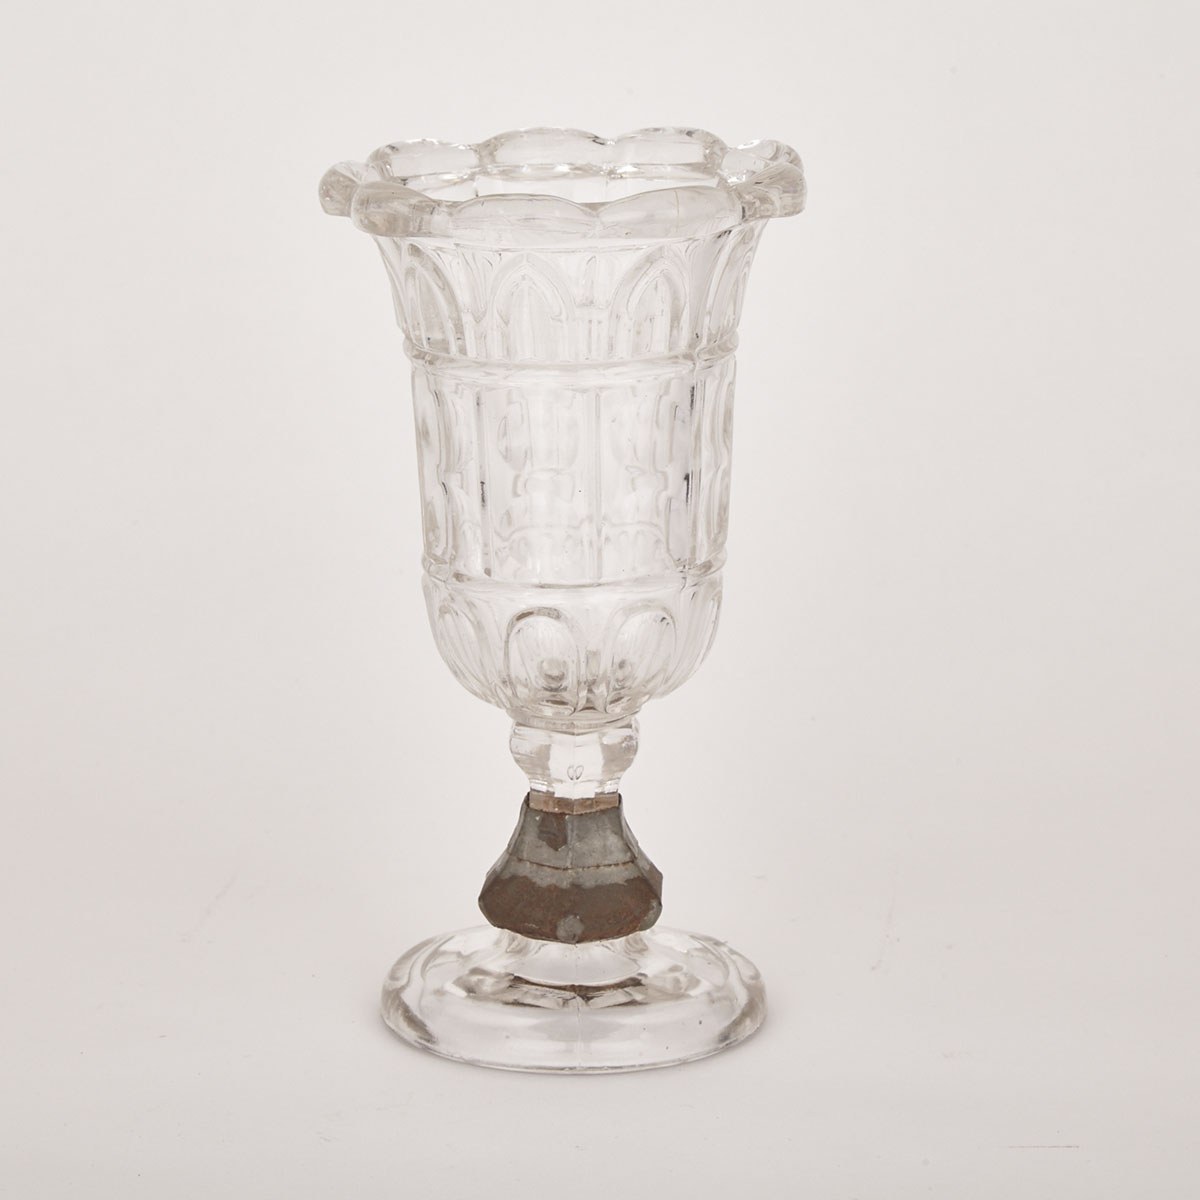 American Pressed Glass Gothic Arch Pattern Celery Vase With Tin Collar ‘Make Do’ Repair, 19th century